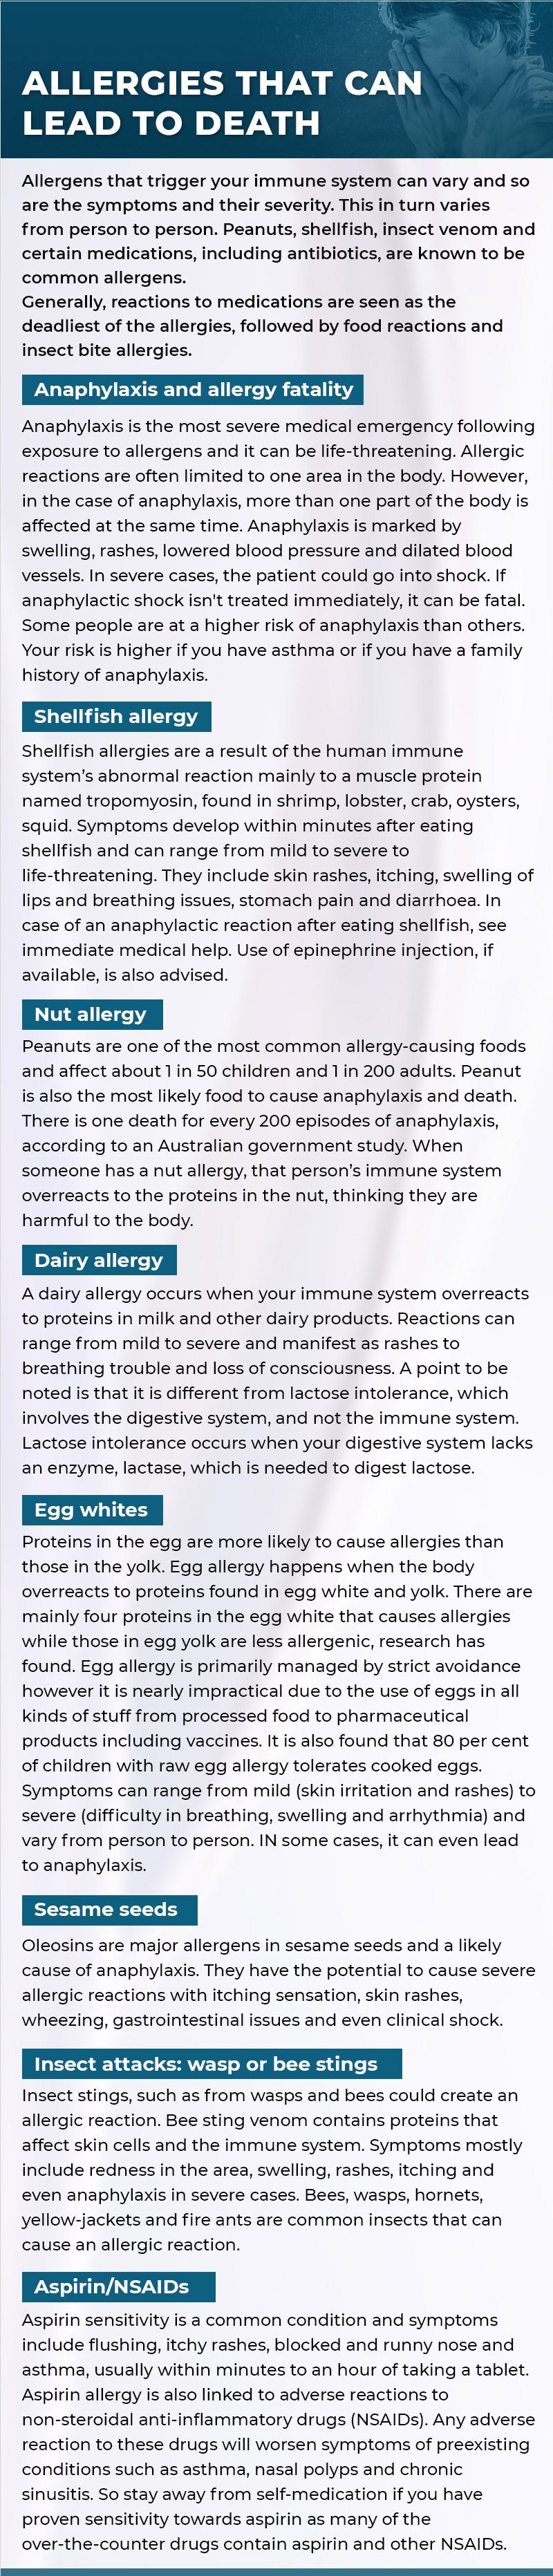 Allergies that can lead to death